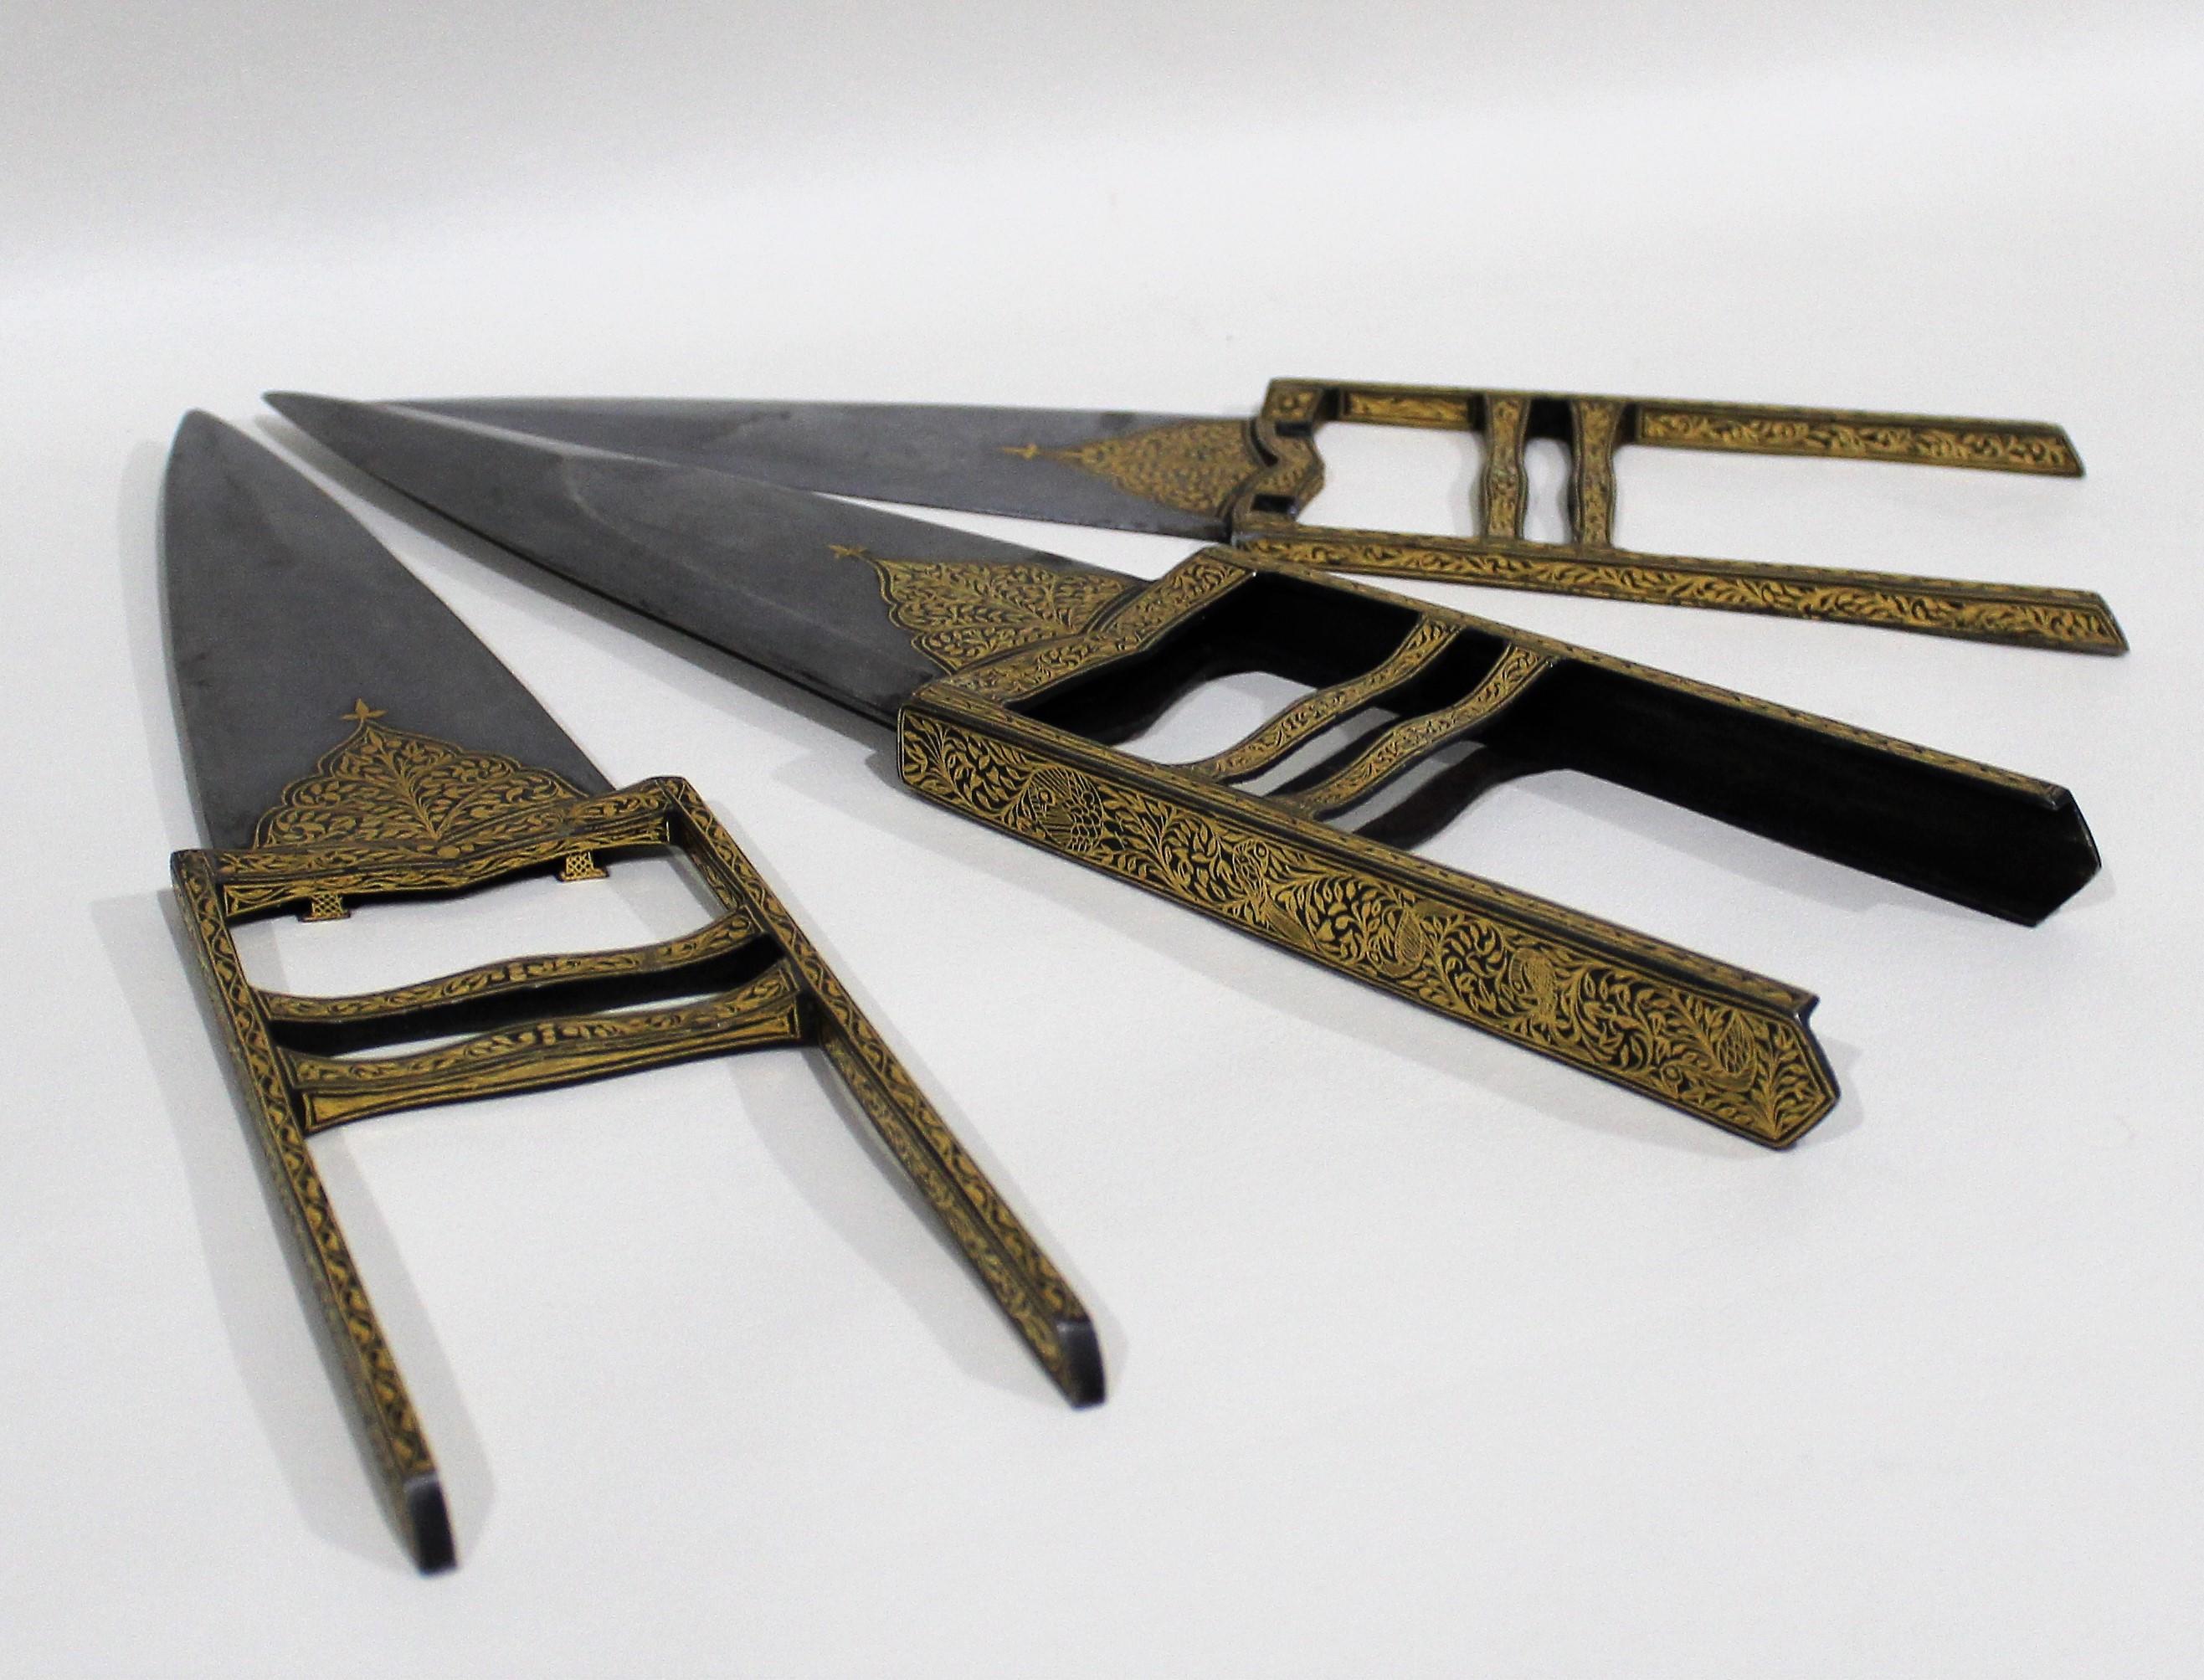 This Indian Katar “triplex” is made from Damascus steel and consists of two split halves, which are joined into one, and invested in the Qatari sheath. This Katar features gold damascene patterns that were done by a master craftsmen of the period.